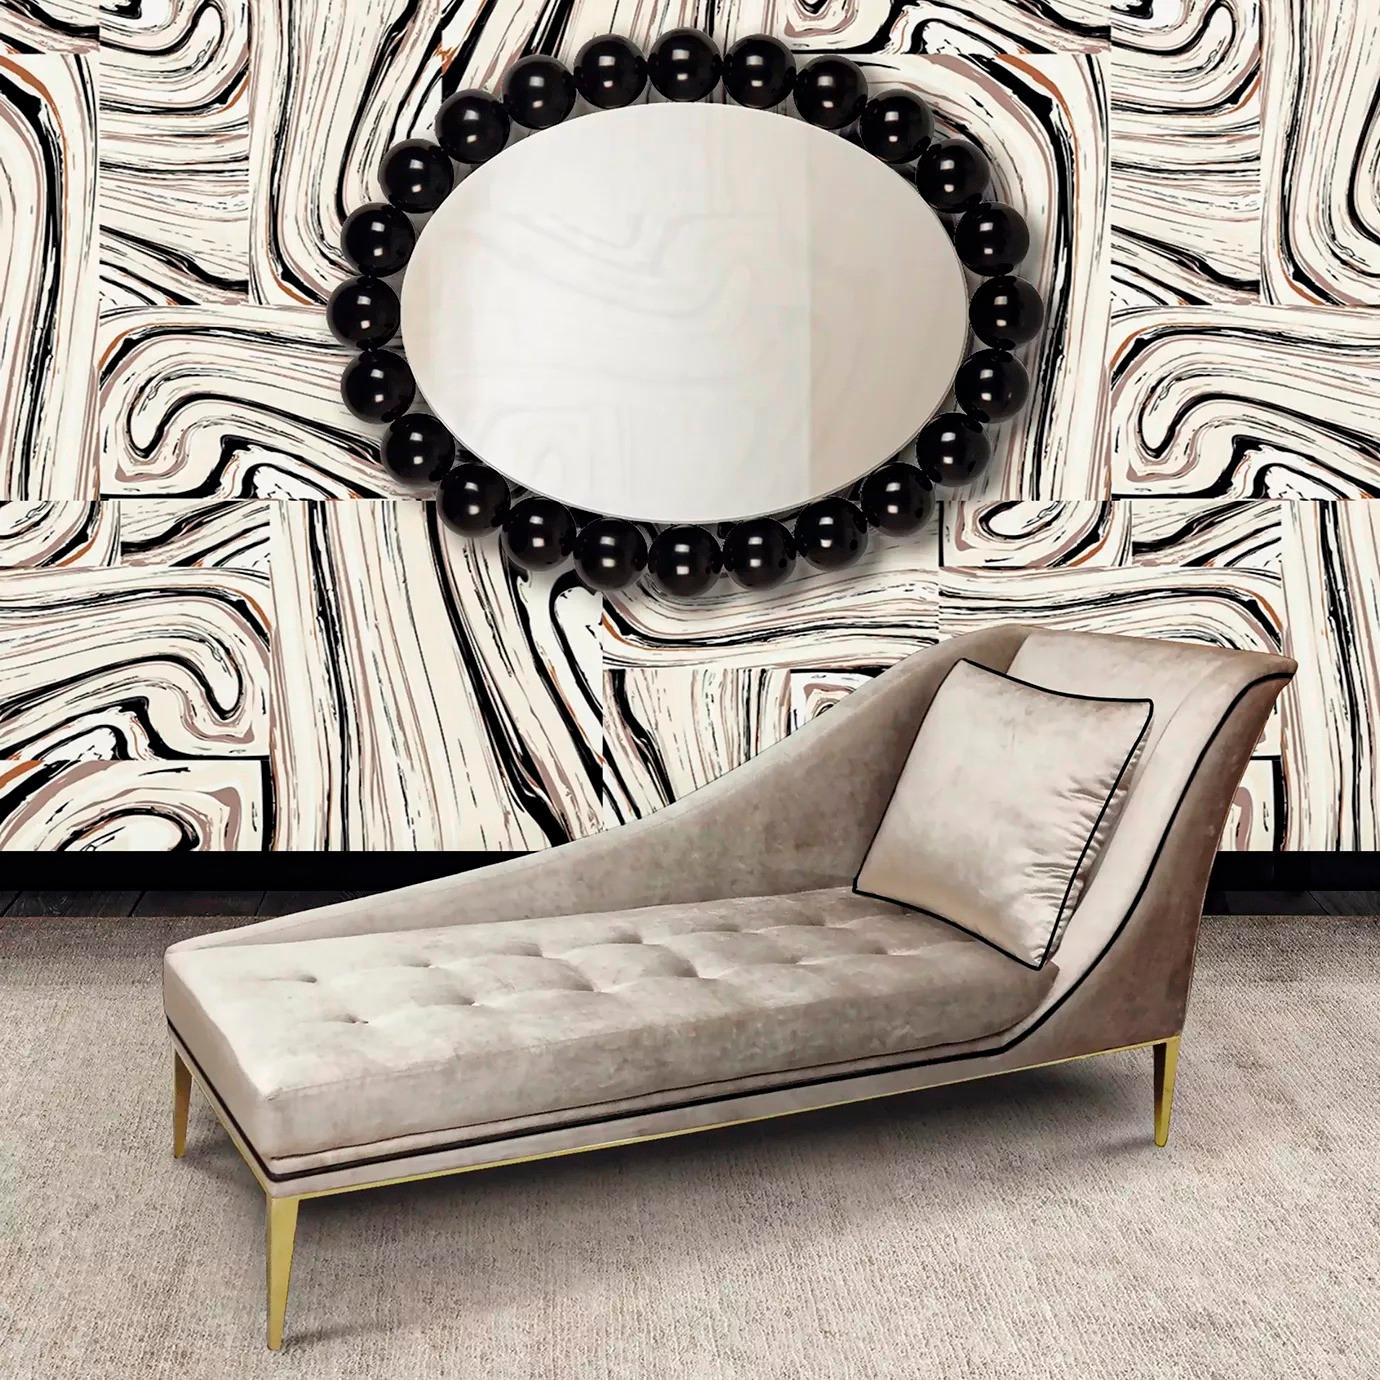 Designed with a seductress in mind the Envy Chaise will ignite your air with luxury design. Fully upholstered in lux upholstery fabric with a tailored cushion. This irresistible chaise is accented with soft button tufting. A chic metal band wraps